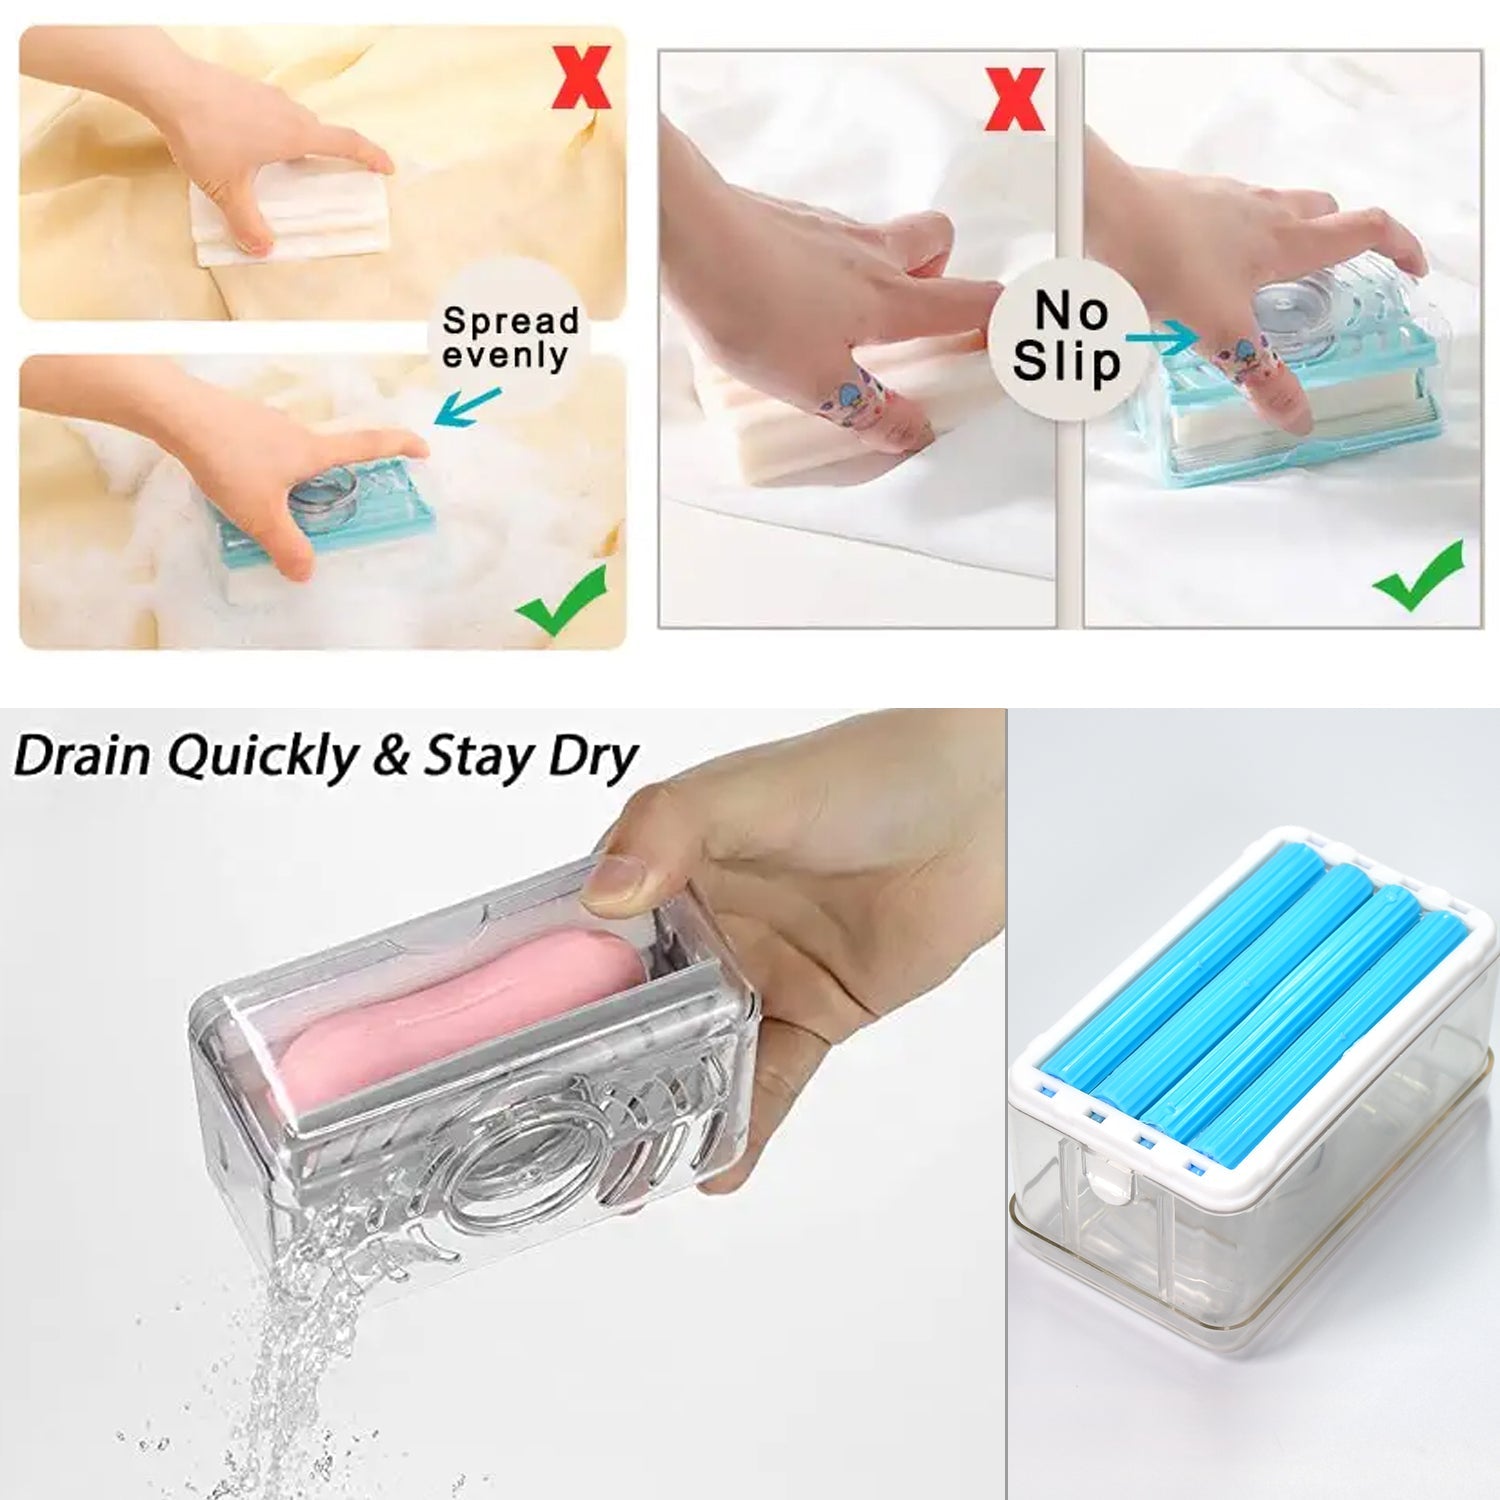 6296 2-in-1 Portable Soap Dish & Soap Dispenser with Roller and Drain Holes, Multifunctional Soap Holder Foaming Soap Bar Box for Home, Kitchen, Bathroom DeoDap